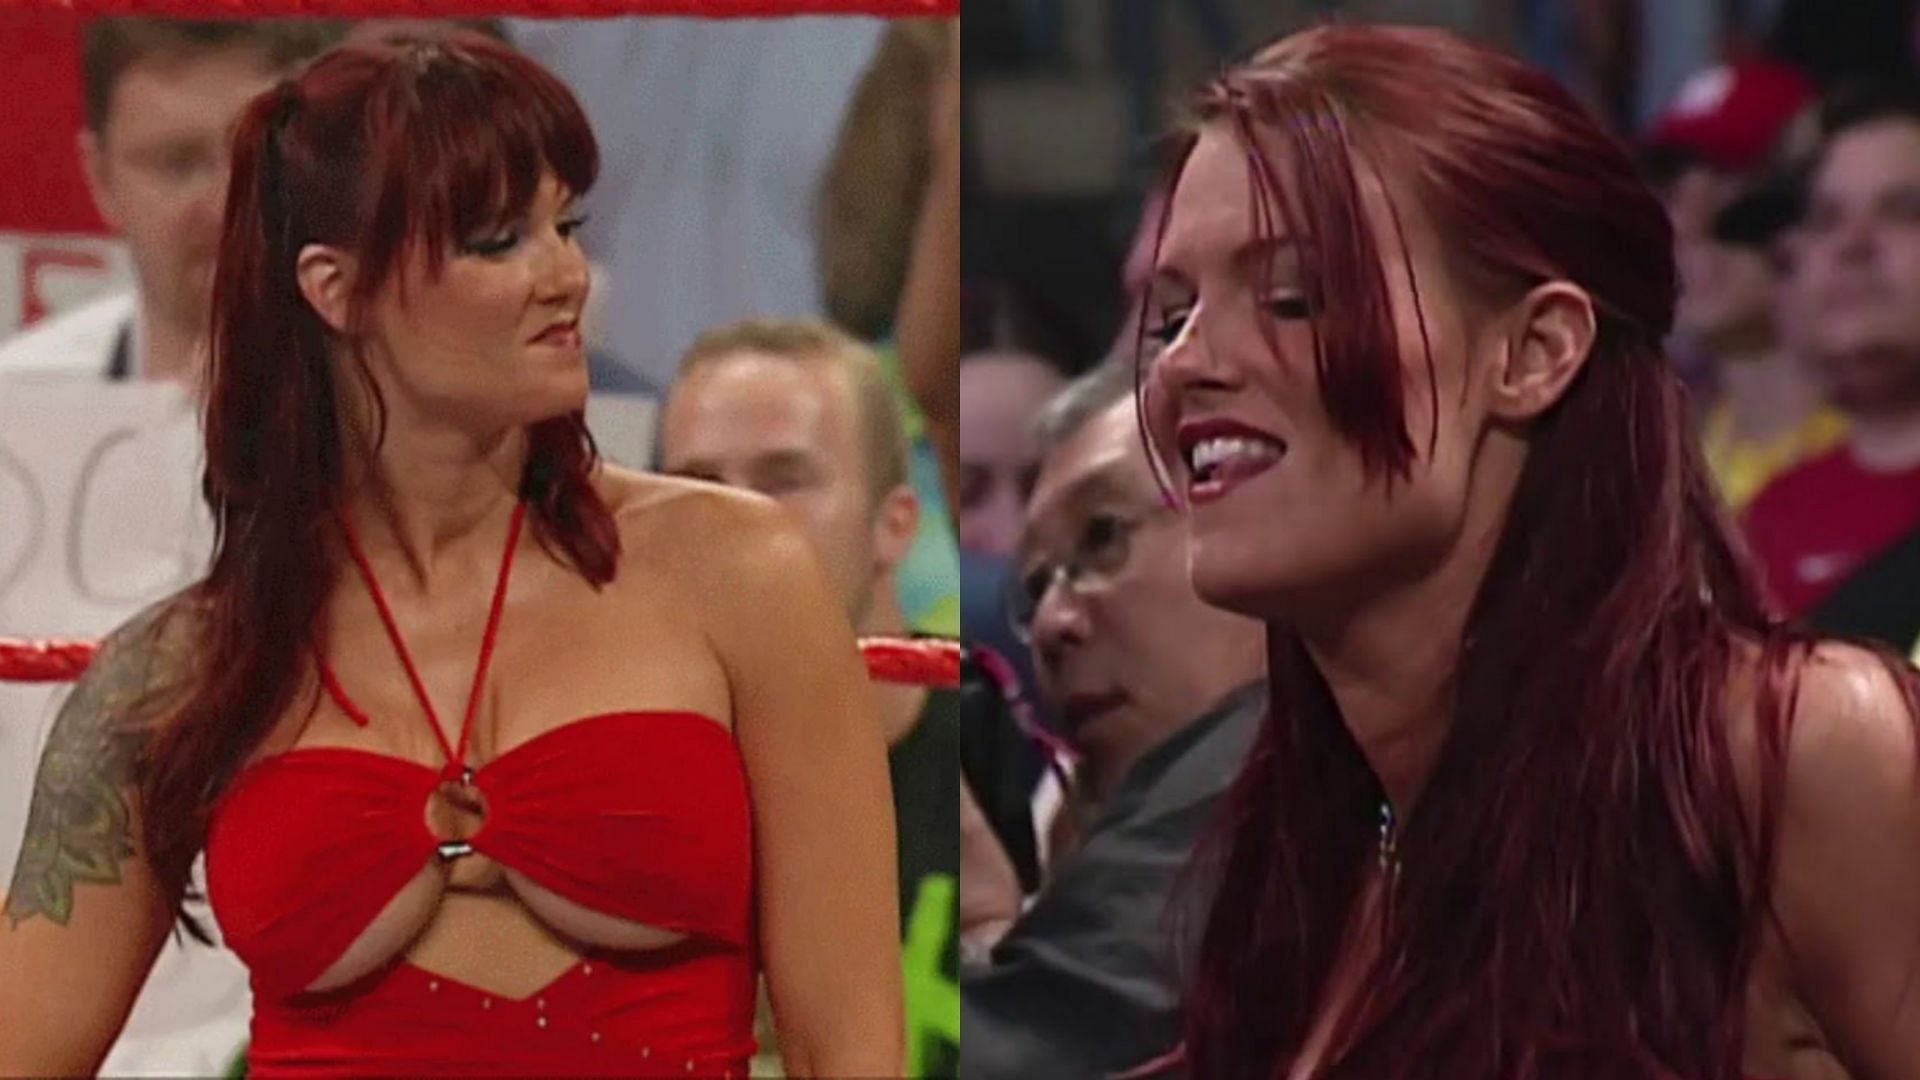 Hall of Famer Lita suffered an unfortunate accident at a WWE event